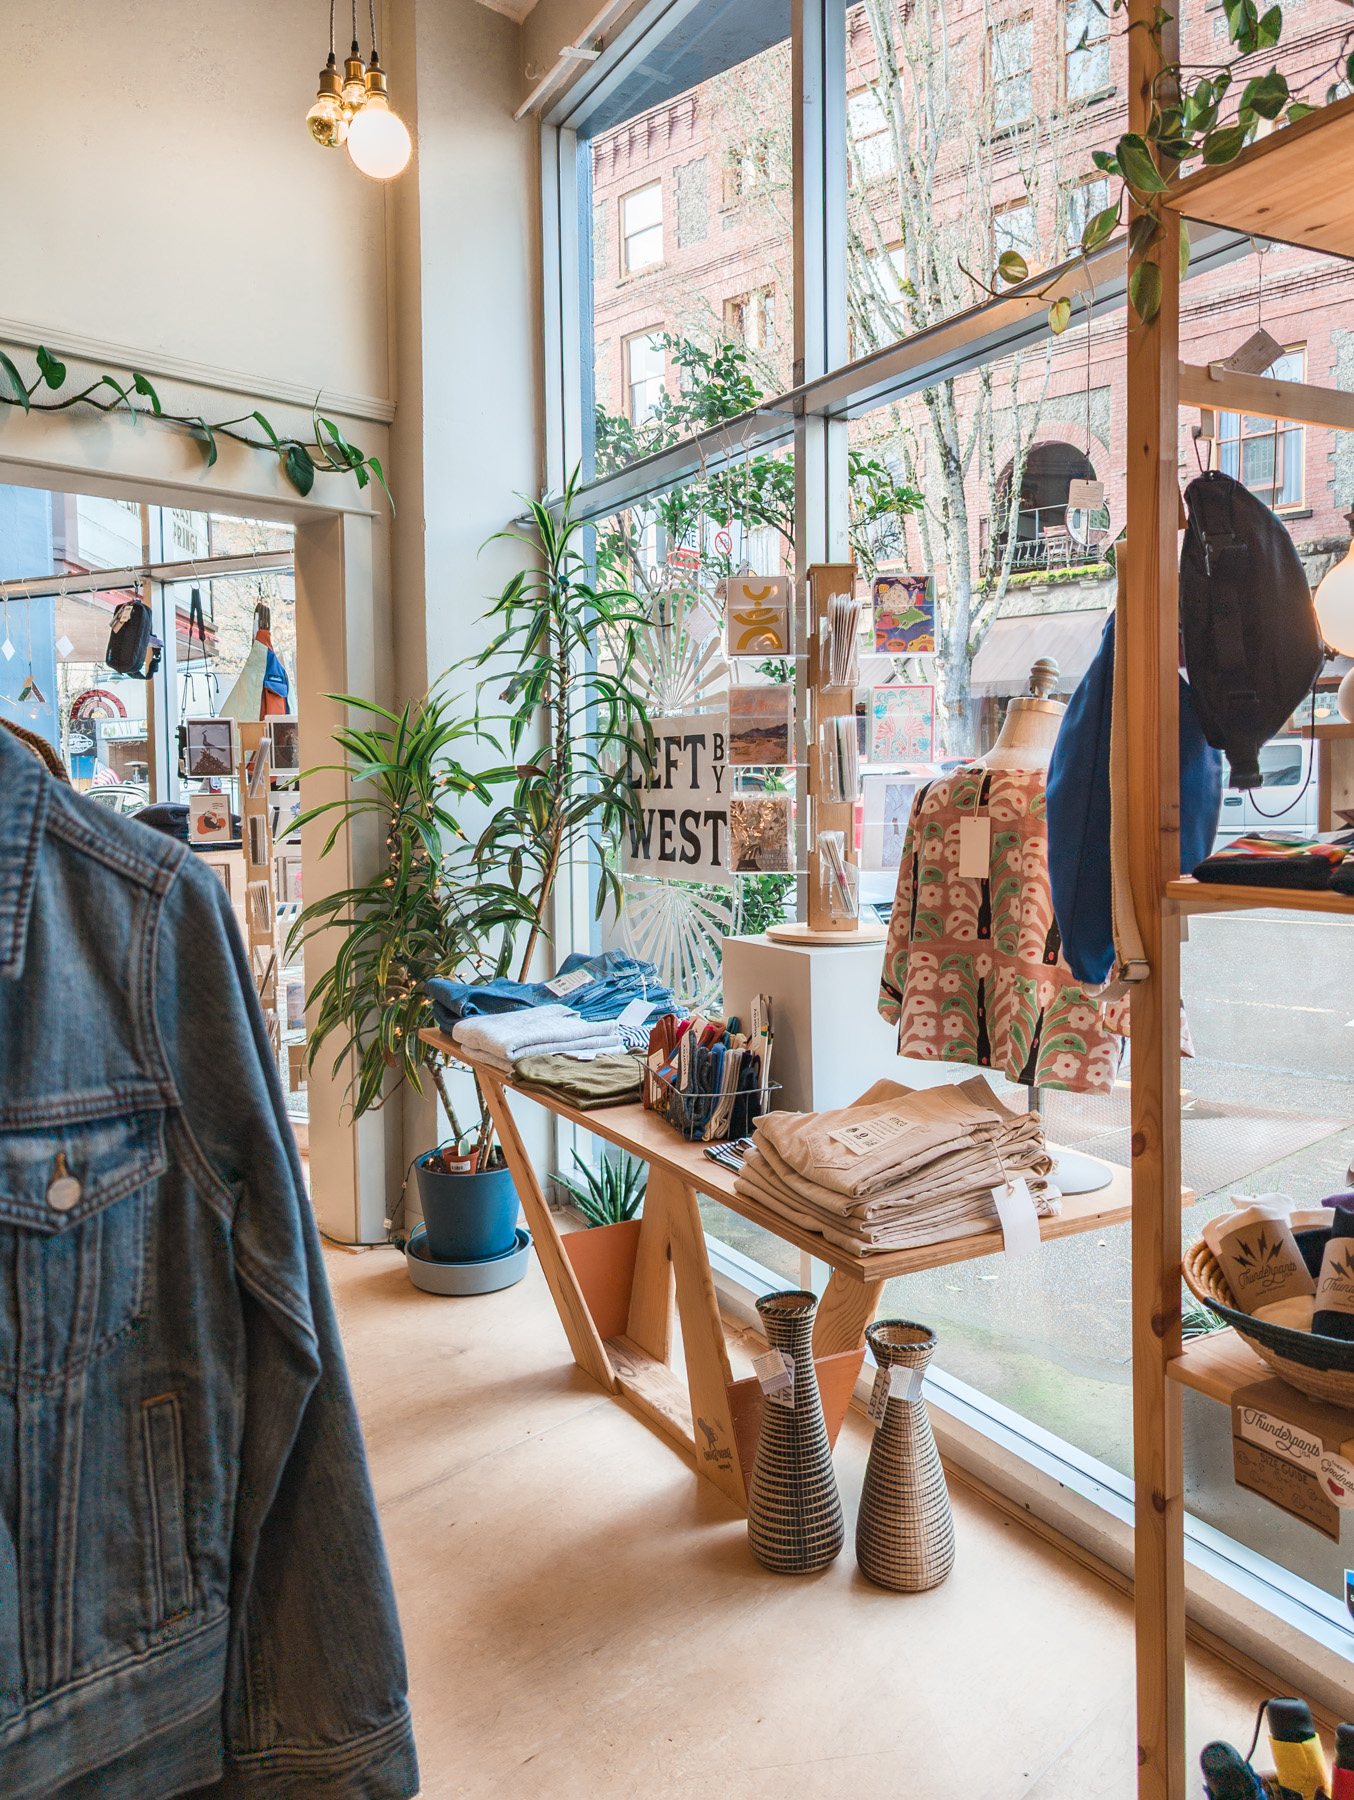 Left By West, a boutique in downtown McMinnville, Oregon